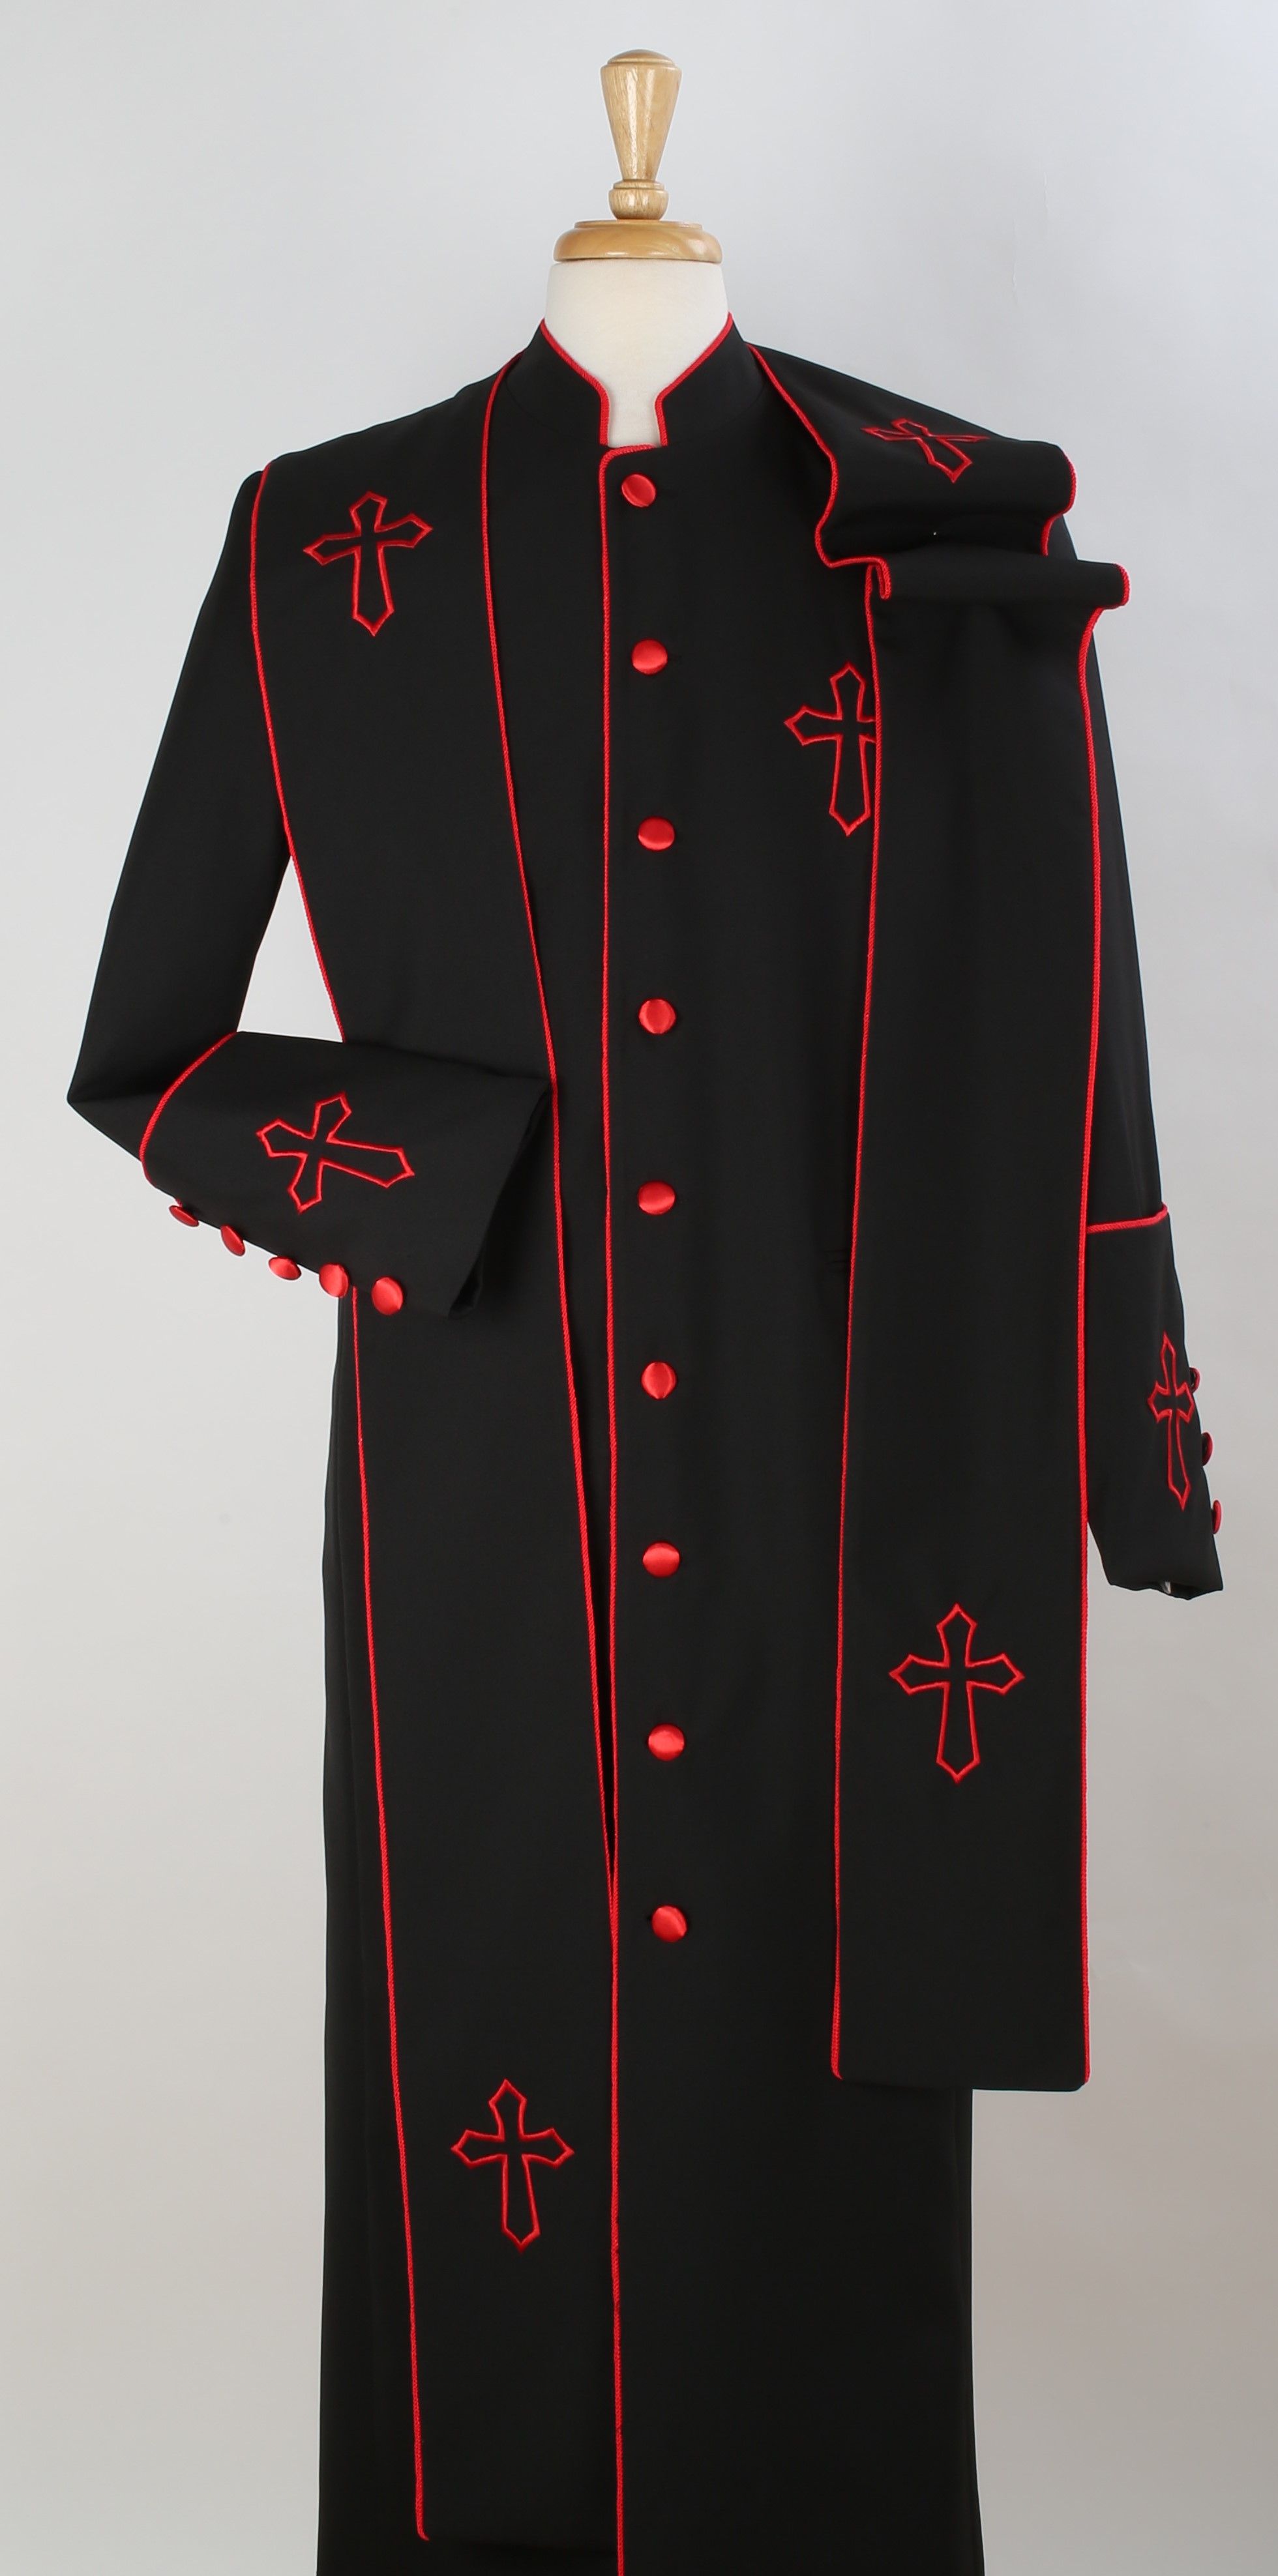 Tony Blake Men's Outlet Church Robe - Multiple Colors Available